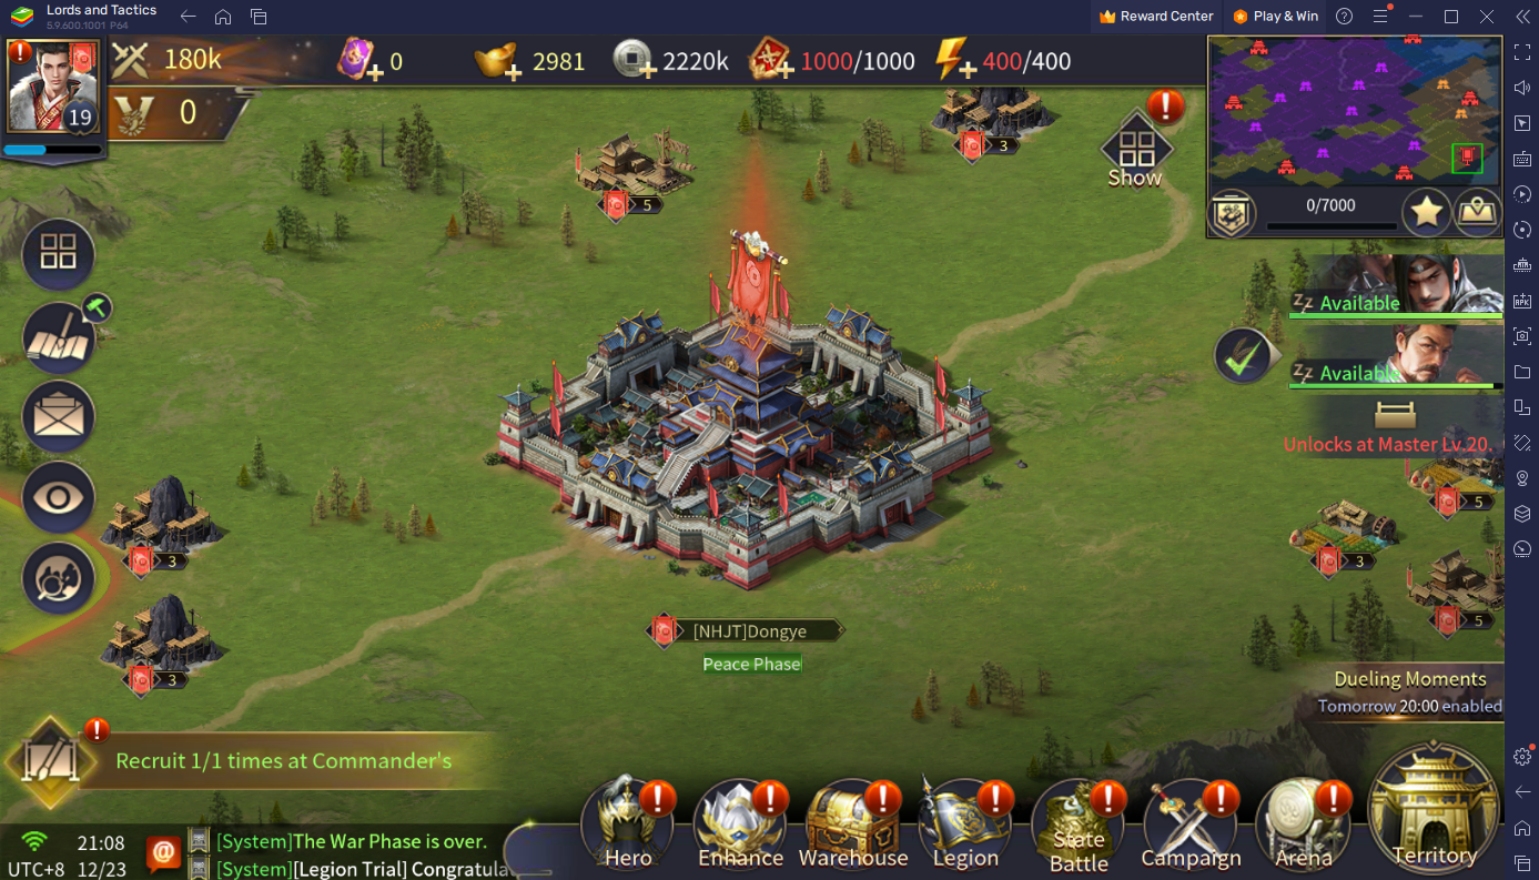 BlueStacks' Beginners Guide to Play Lords and Tactics